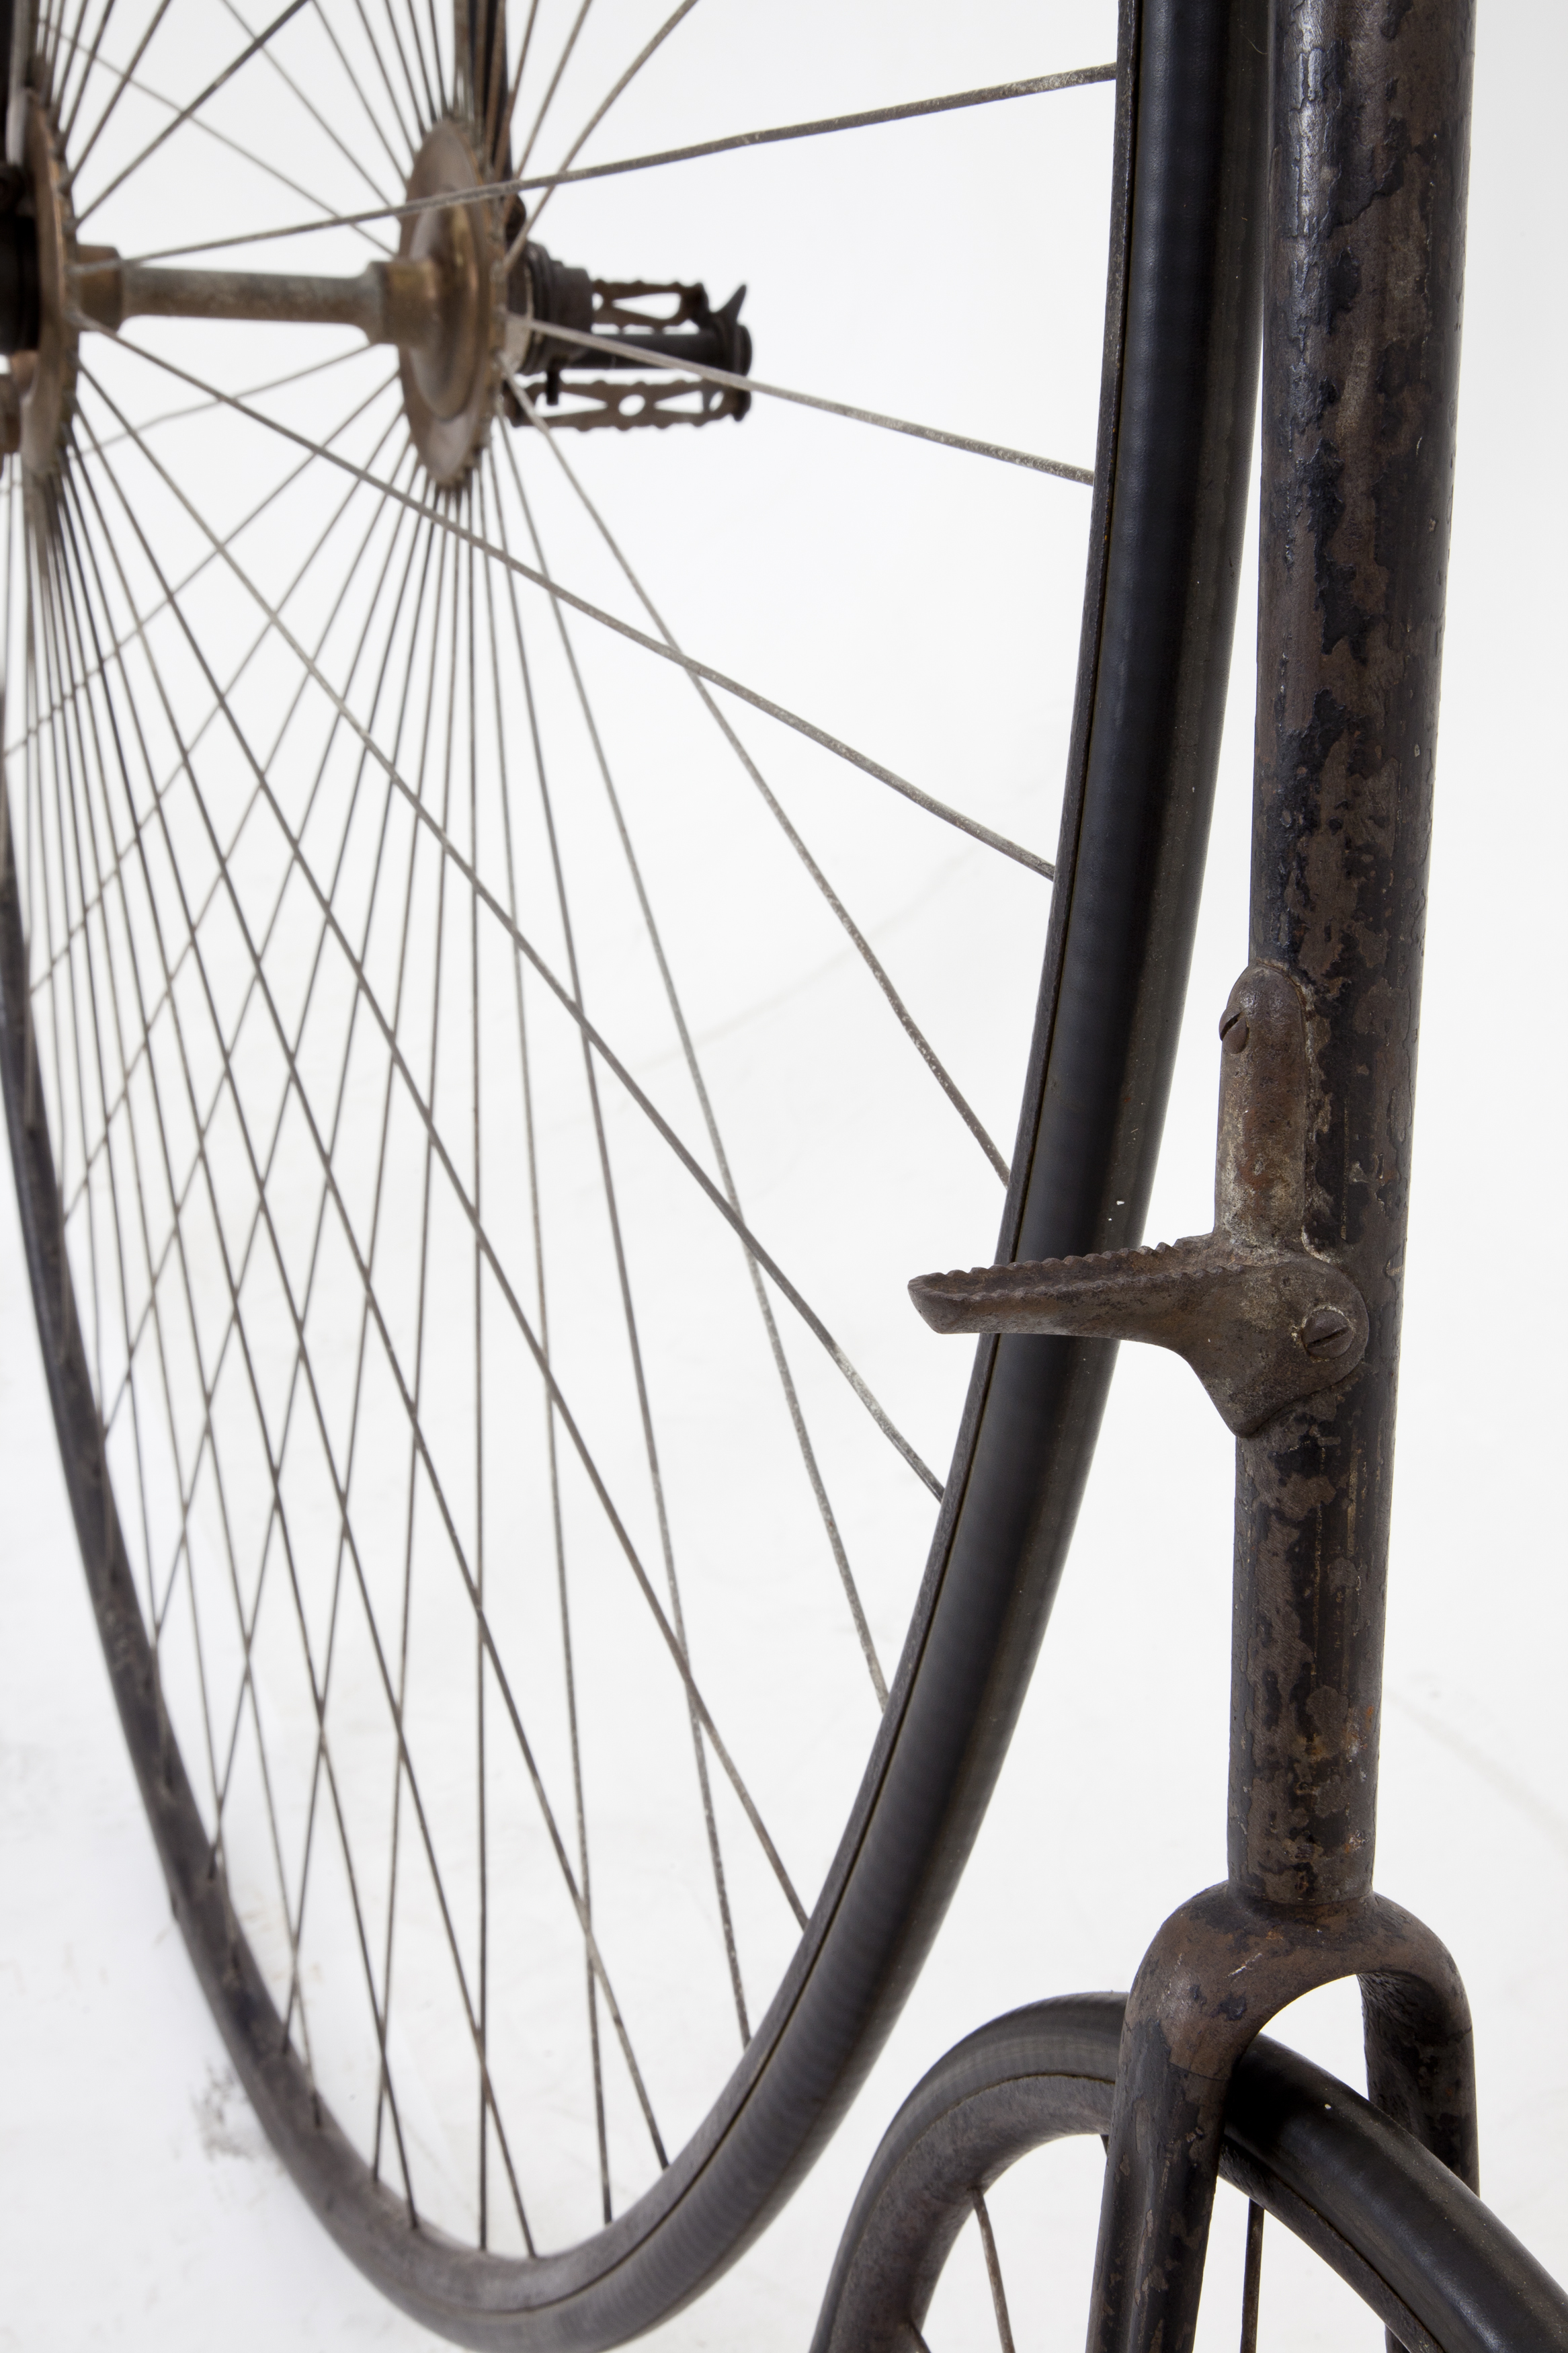 Star British Challenge penny farthing bicycle made by Singer & Co., Coventry, England, c.1885